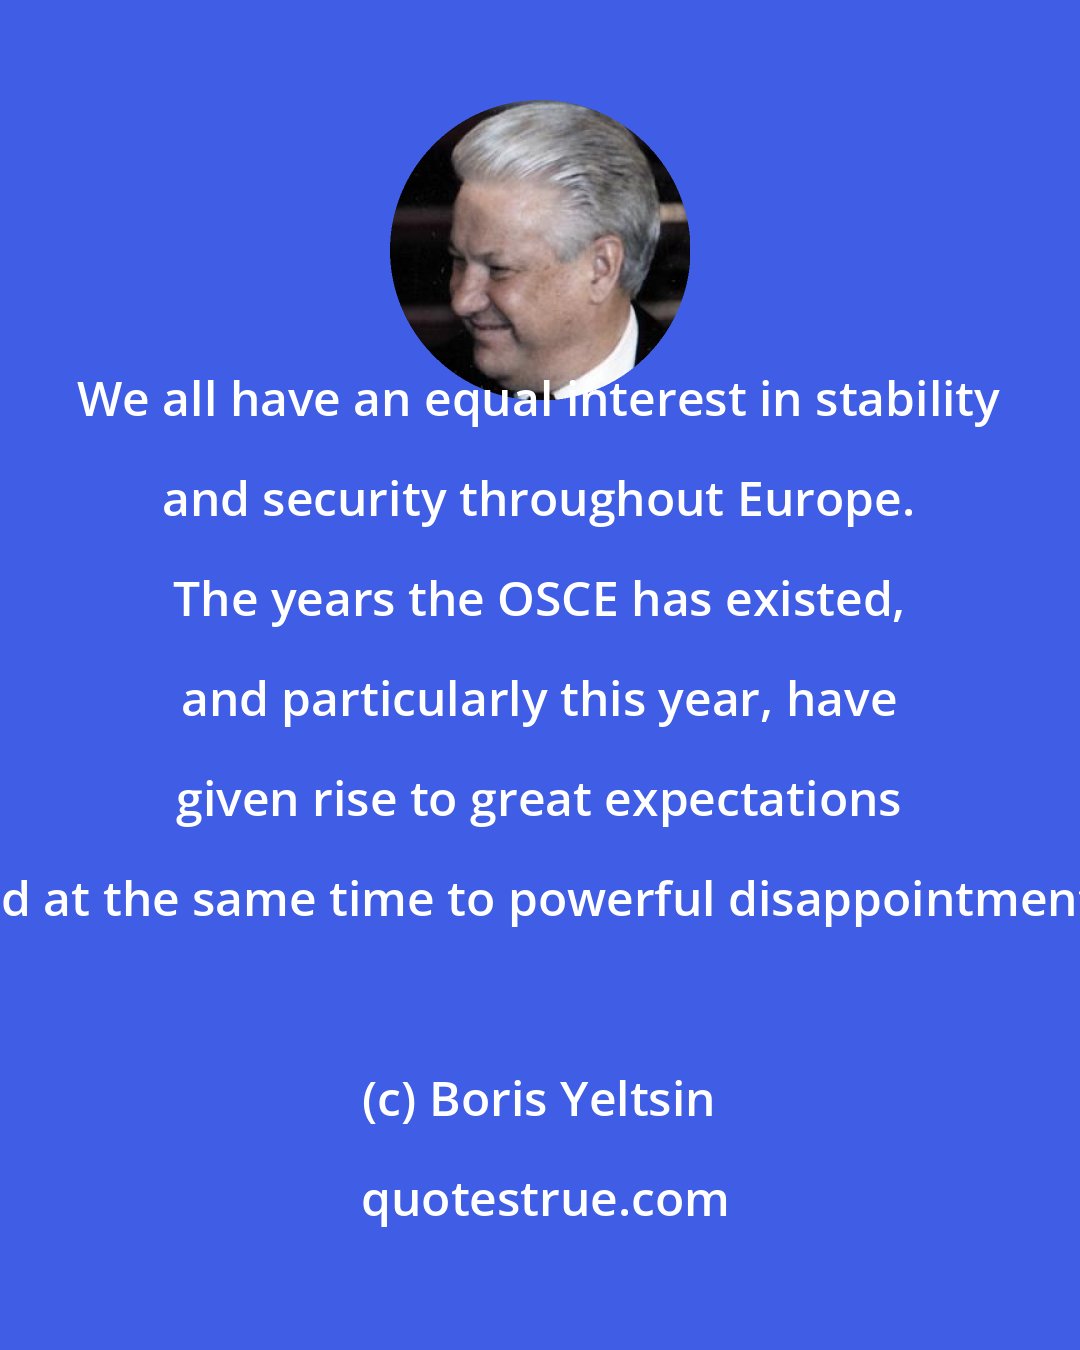 Boris Yeltsin: We all have an equal interest in stability and security throughout Europe. The years the OSCE has existed, and particularly this year, have given rise to great expectations and at the same time to powerful disappointments.